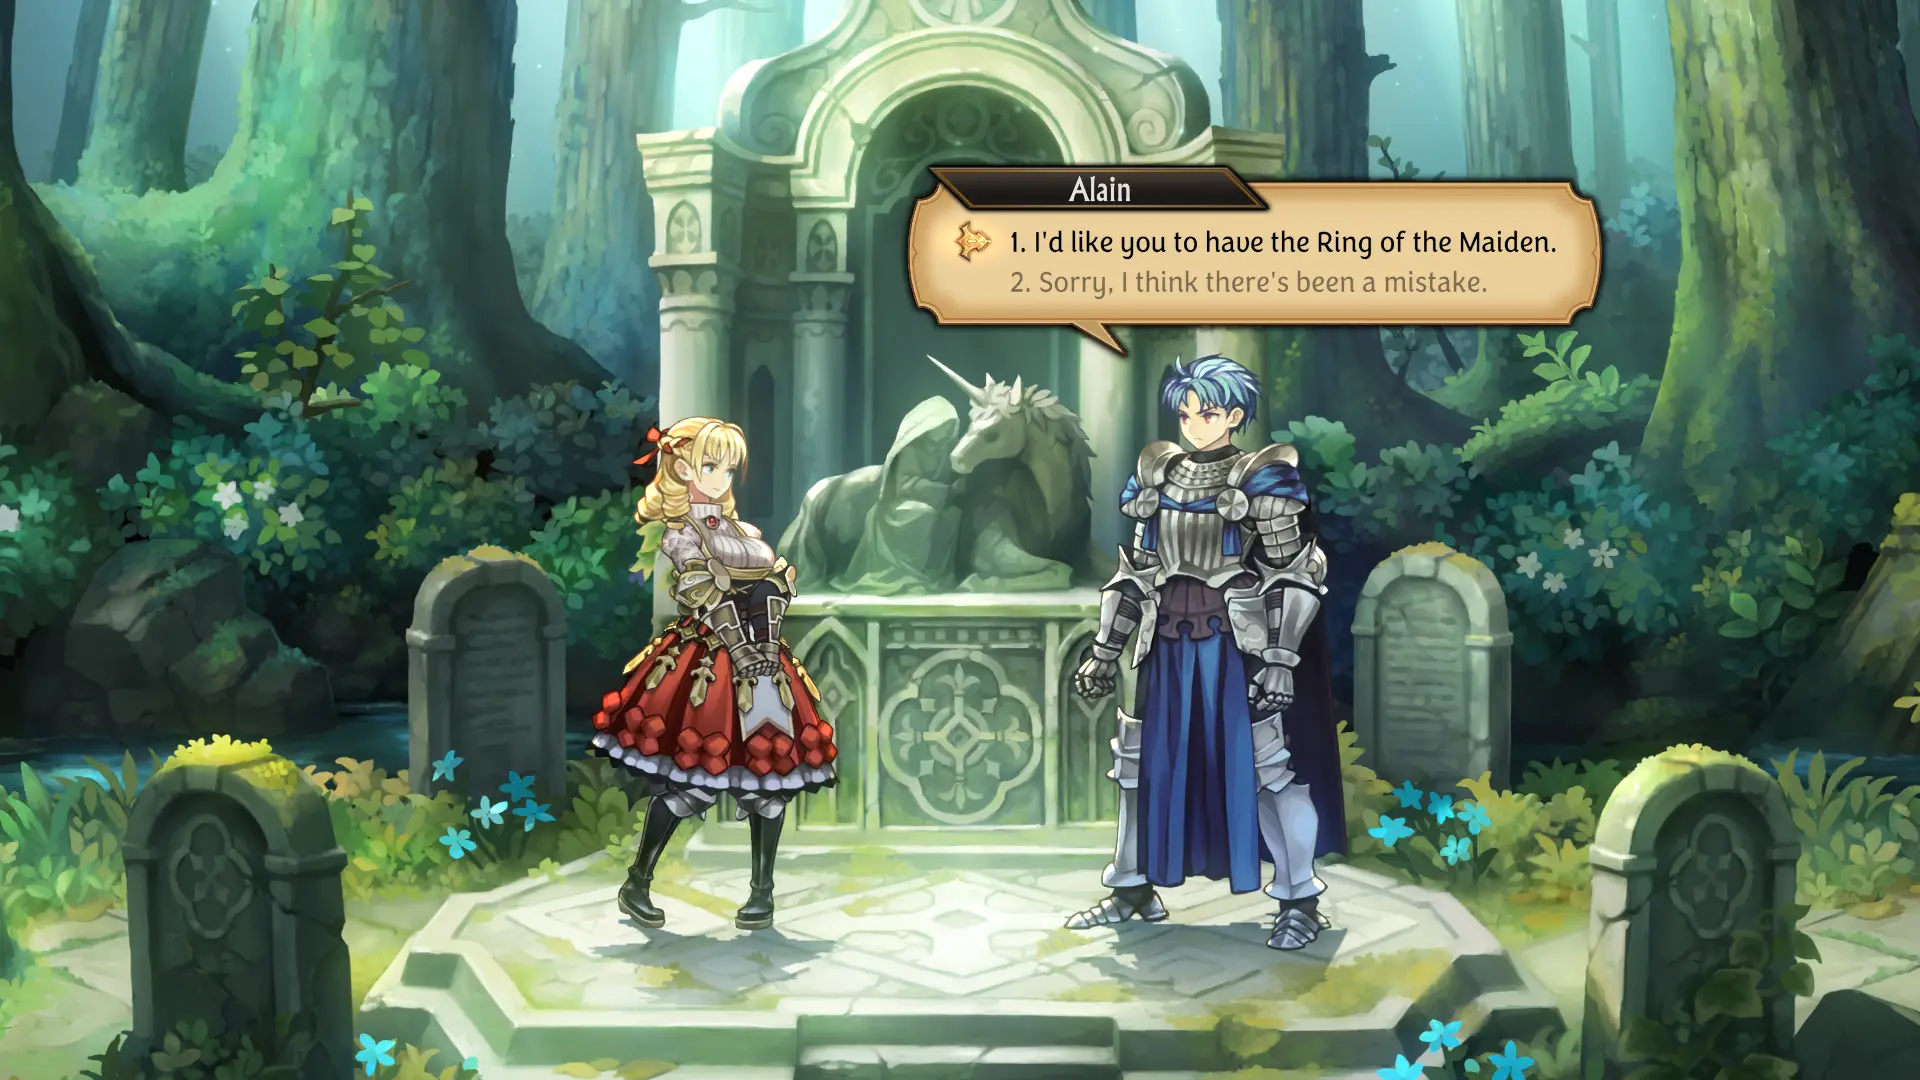 Unicorn Overlord Review: &quot;Rivals Some Of The Best Of Fire Emblem&quot;